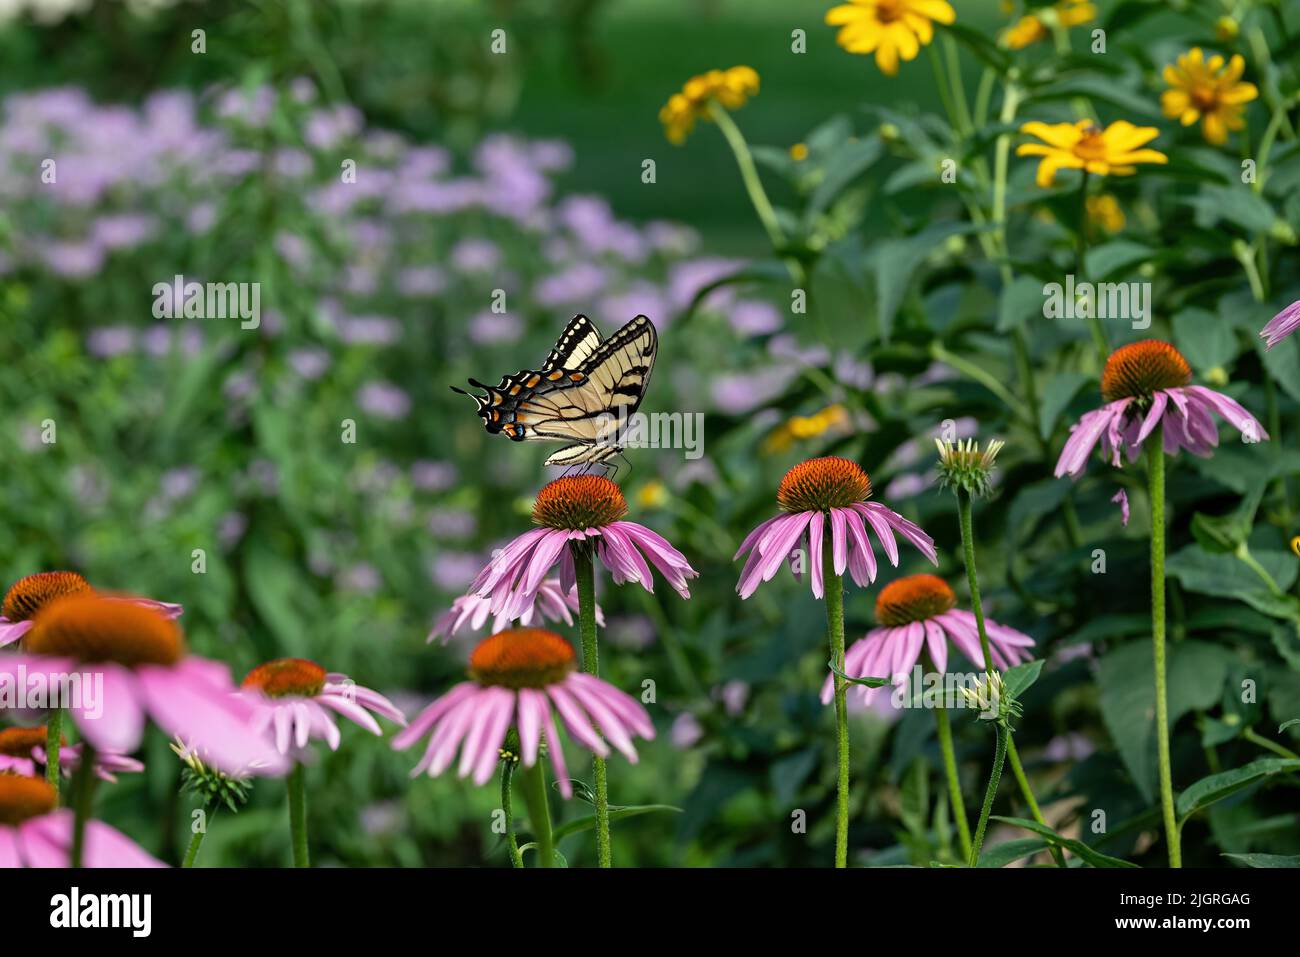 Eastern Tiger Swallowtail butterfly on Echinacea flowers with a blurred background of perennial wildflowers. Stock Photo